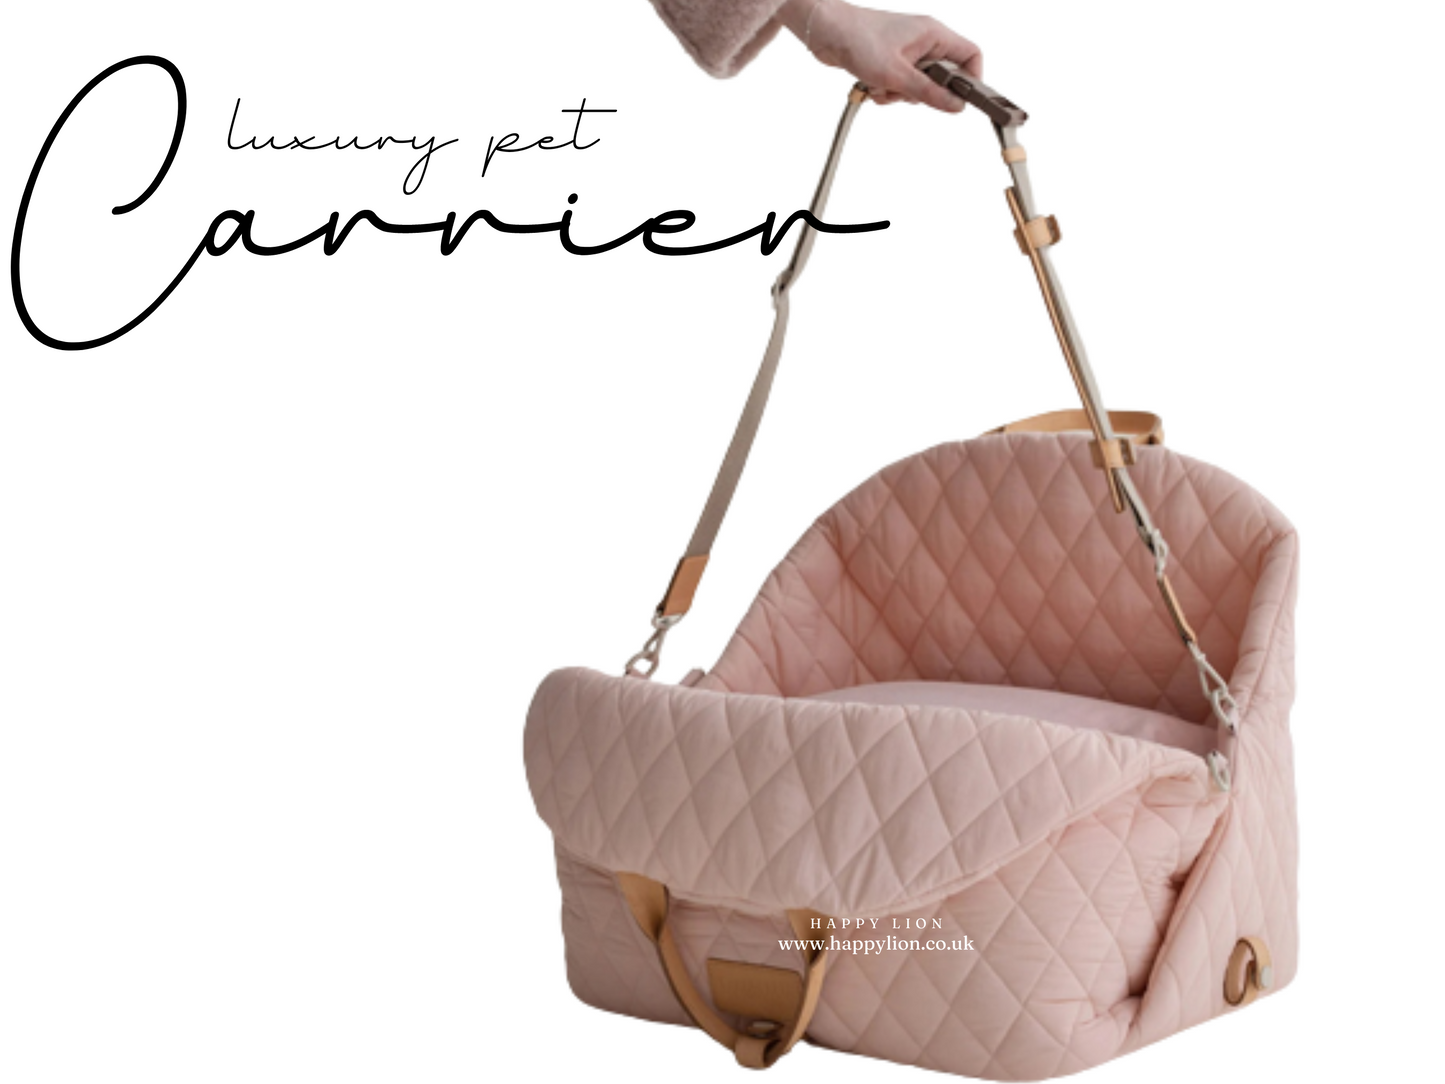 Pink Quilted Dog Carrier